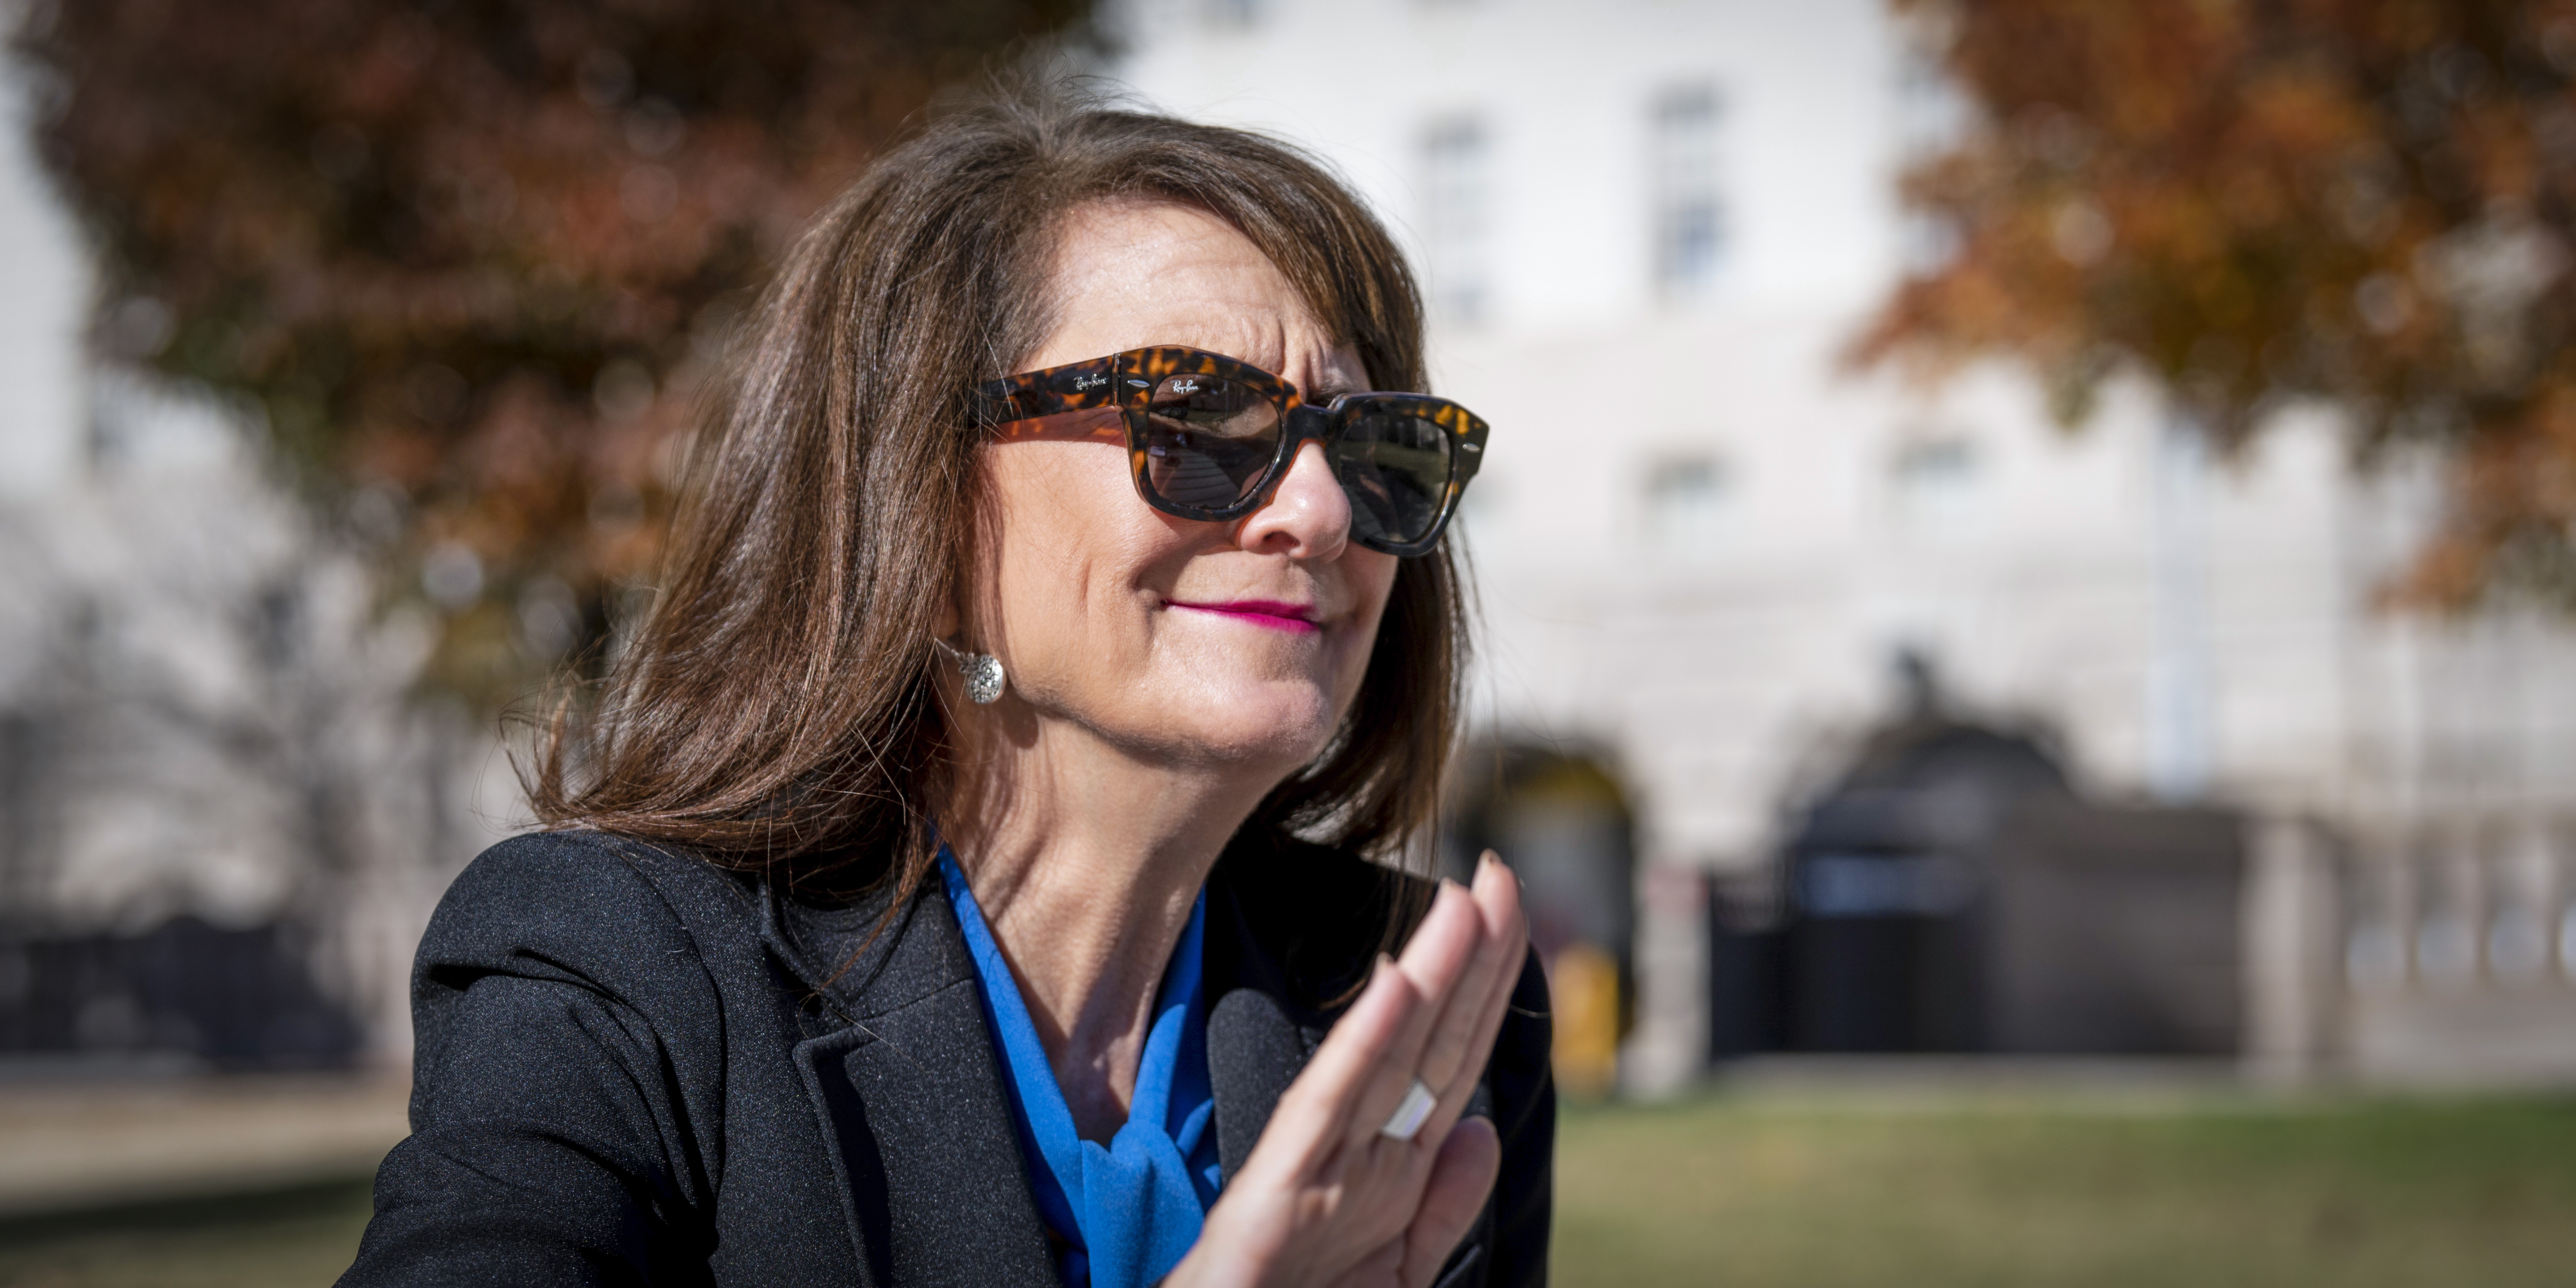 UNITED STATES - NOVEMBER 18: Rep. Marie Newman, D-Ill., speaks with a reporter outside the Capitol on Thursday, Nov. 18, 2021. (Photo by Bill Clark/CQ-Roll Call, Inc via Getty Images)